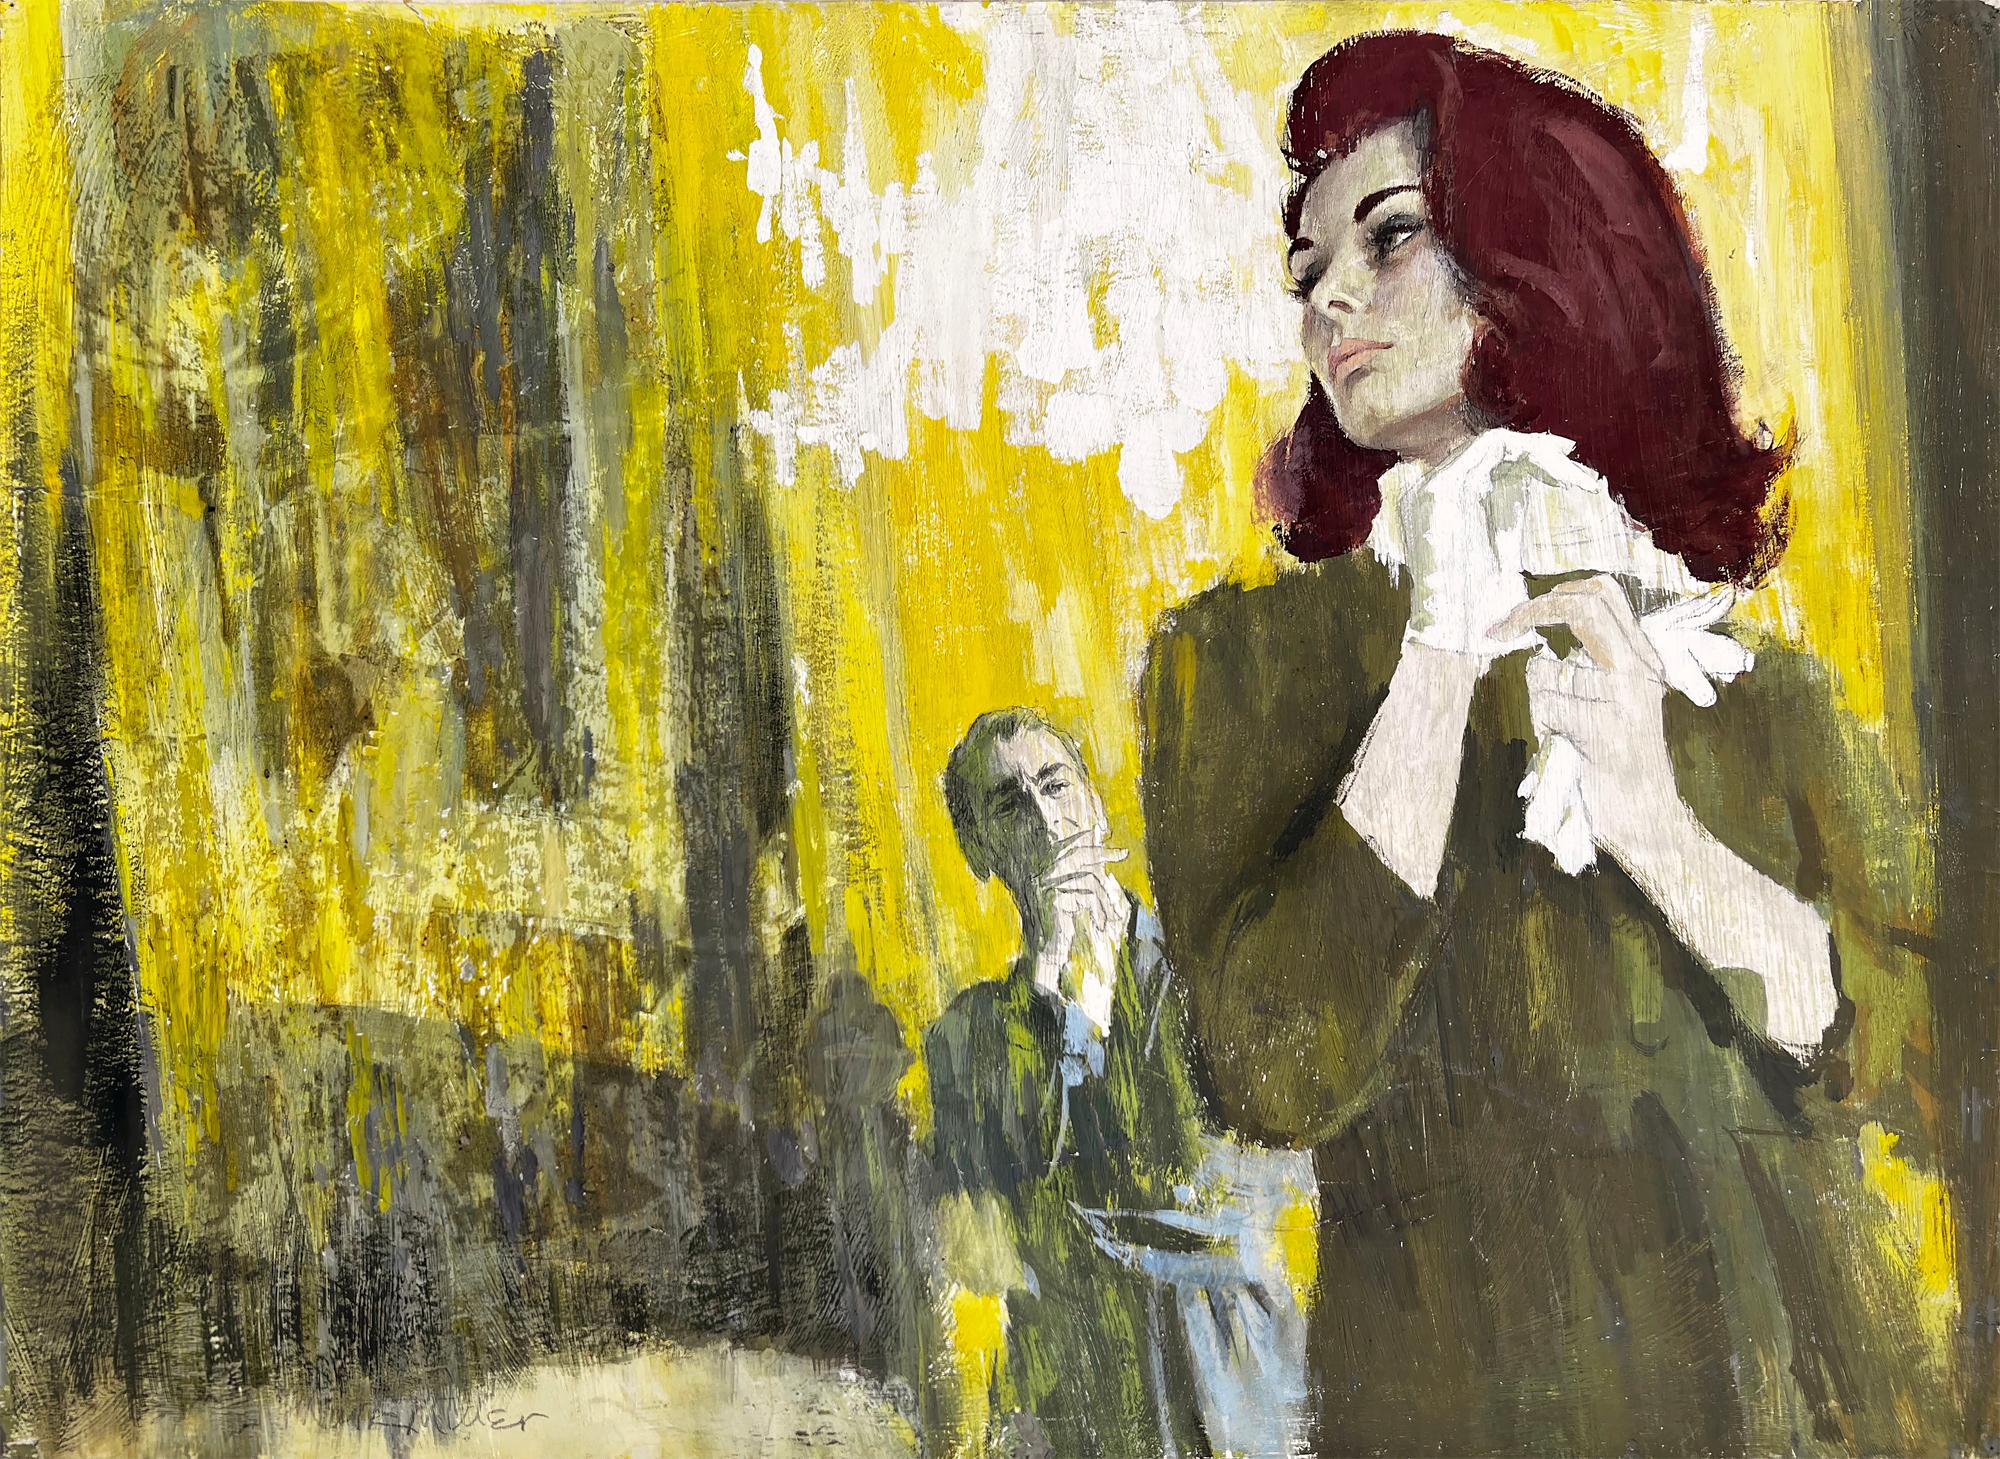 Figurative Painting Mark Miller - « Golden Age of Illustration Romance Story, Man Woman Relationship - Green Yellow